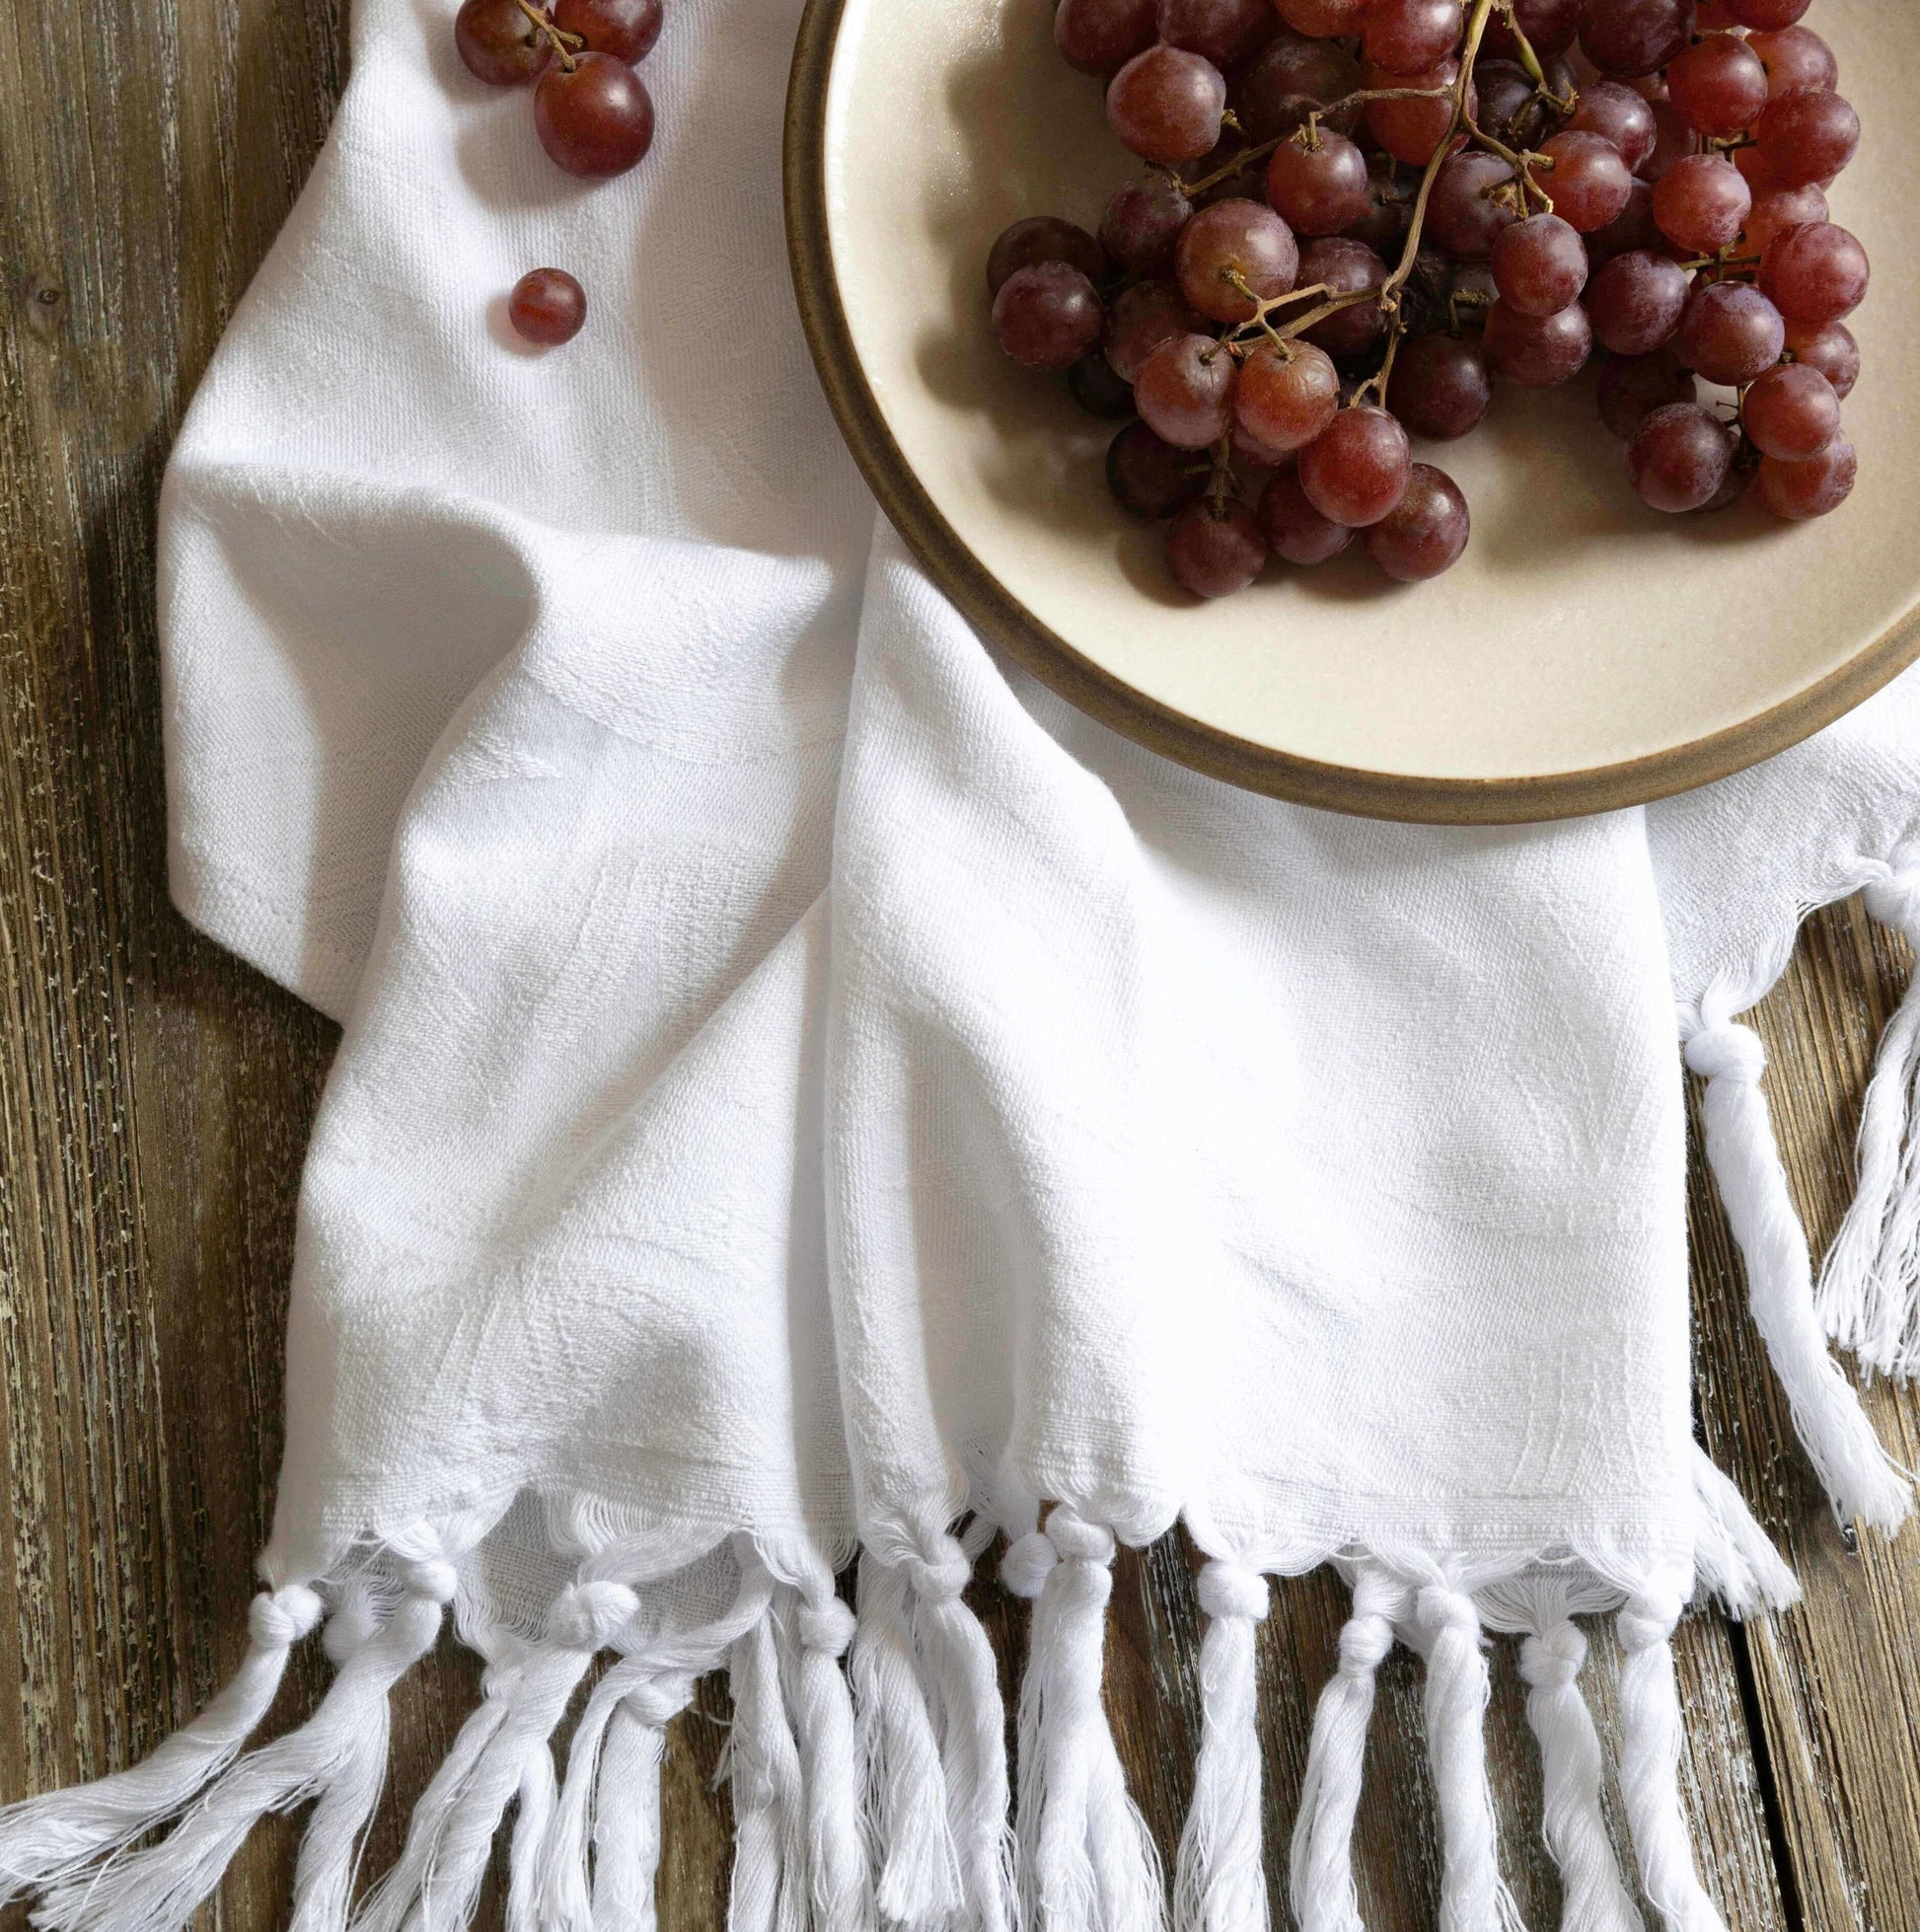  White Turkish towel with grapes on a plate